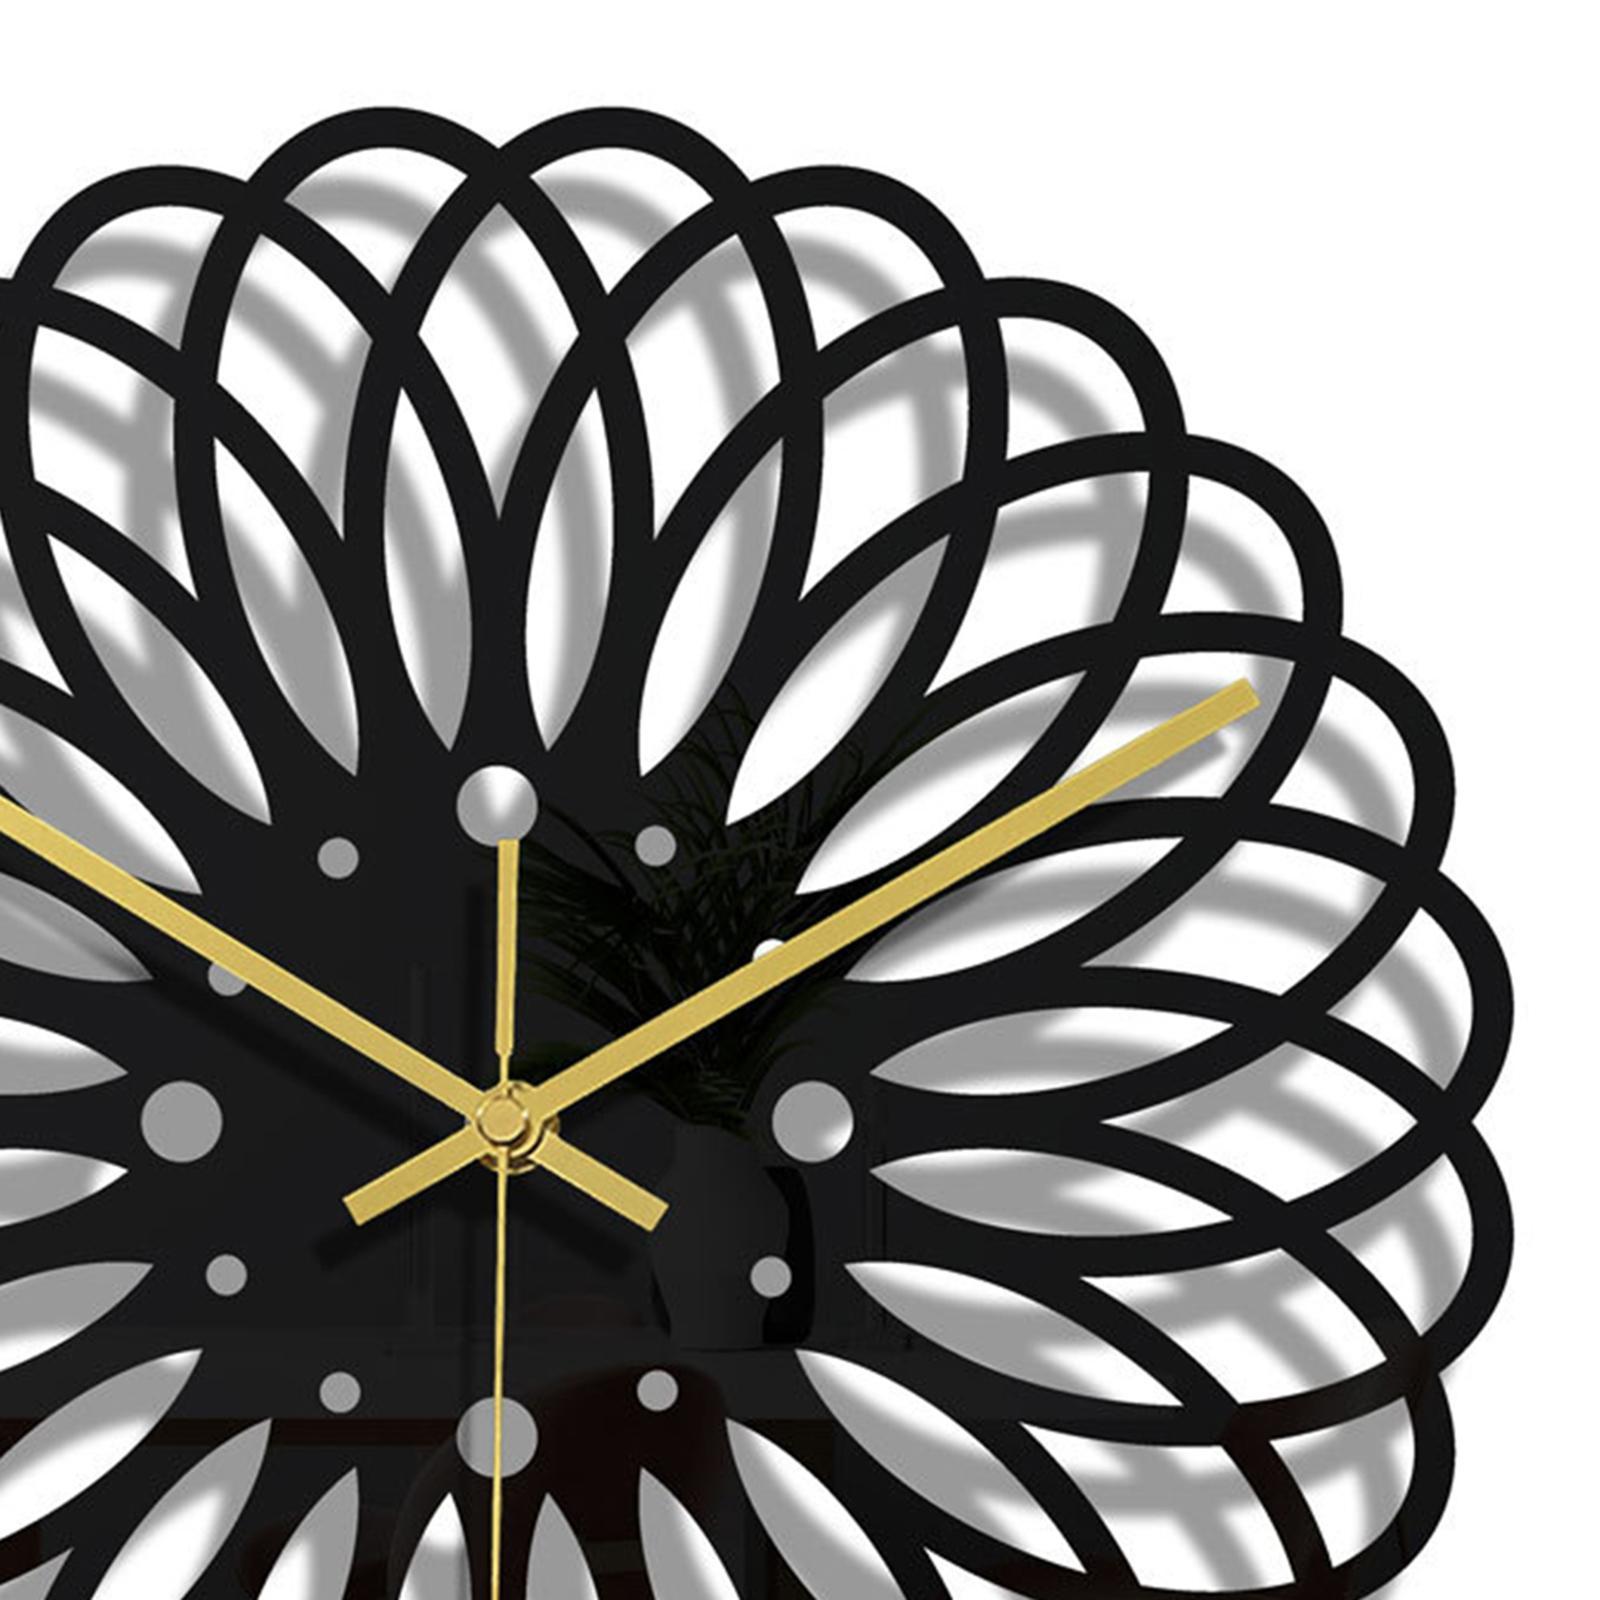 Minimalist Wall Clock Silent Clocks Battery Operated for Living Room Decoration Office